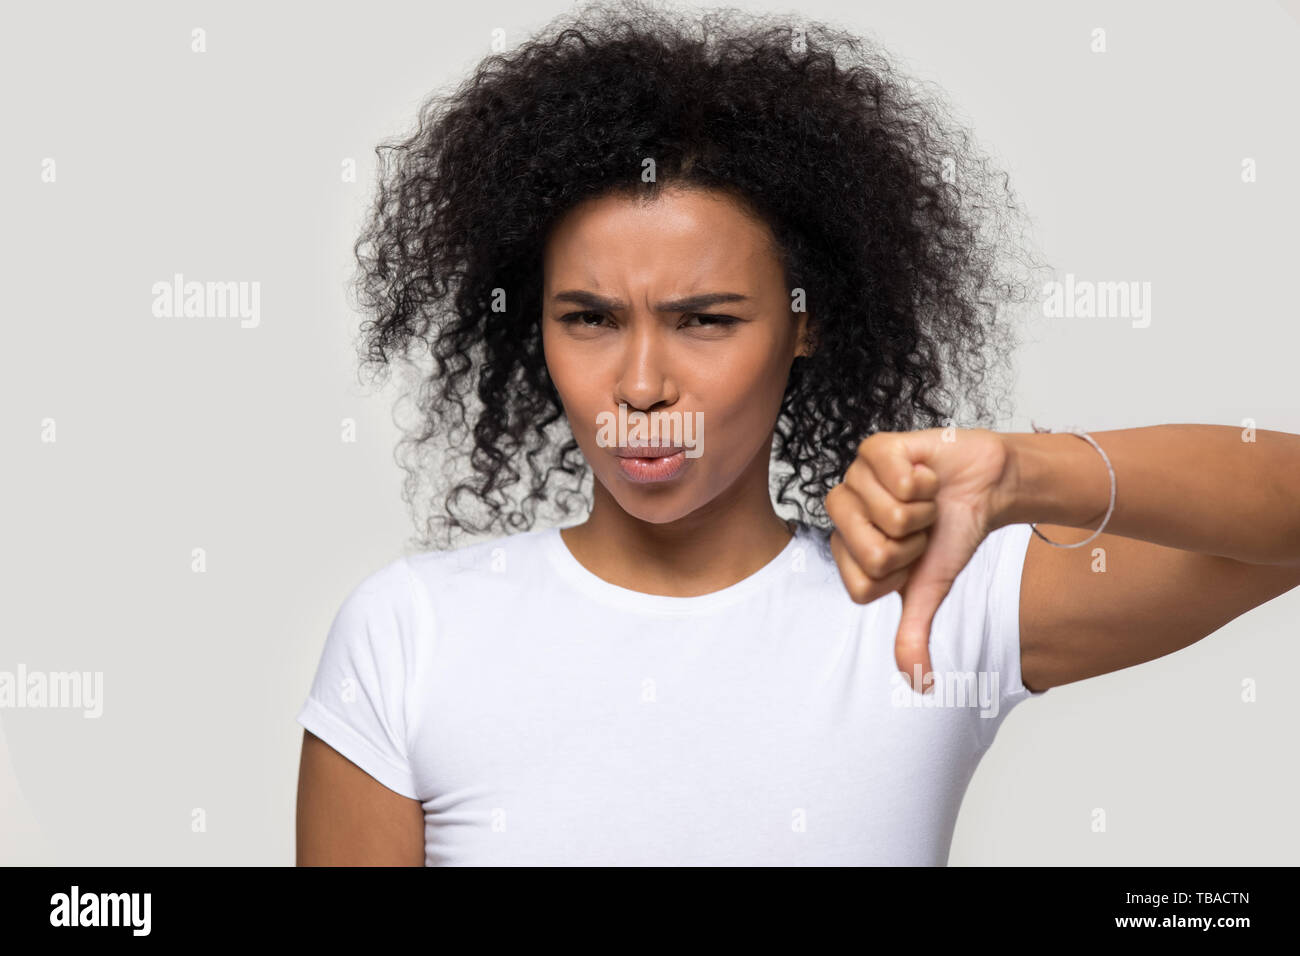 Unsatisfied african woman showing thumb down disapproval gesture Stock Photo